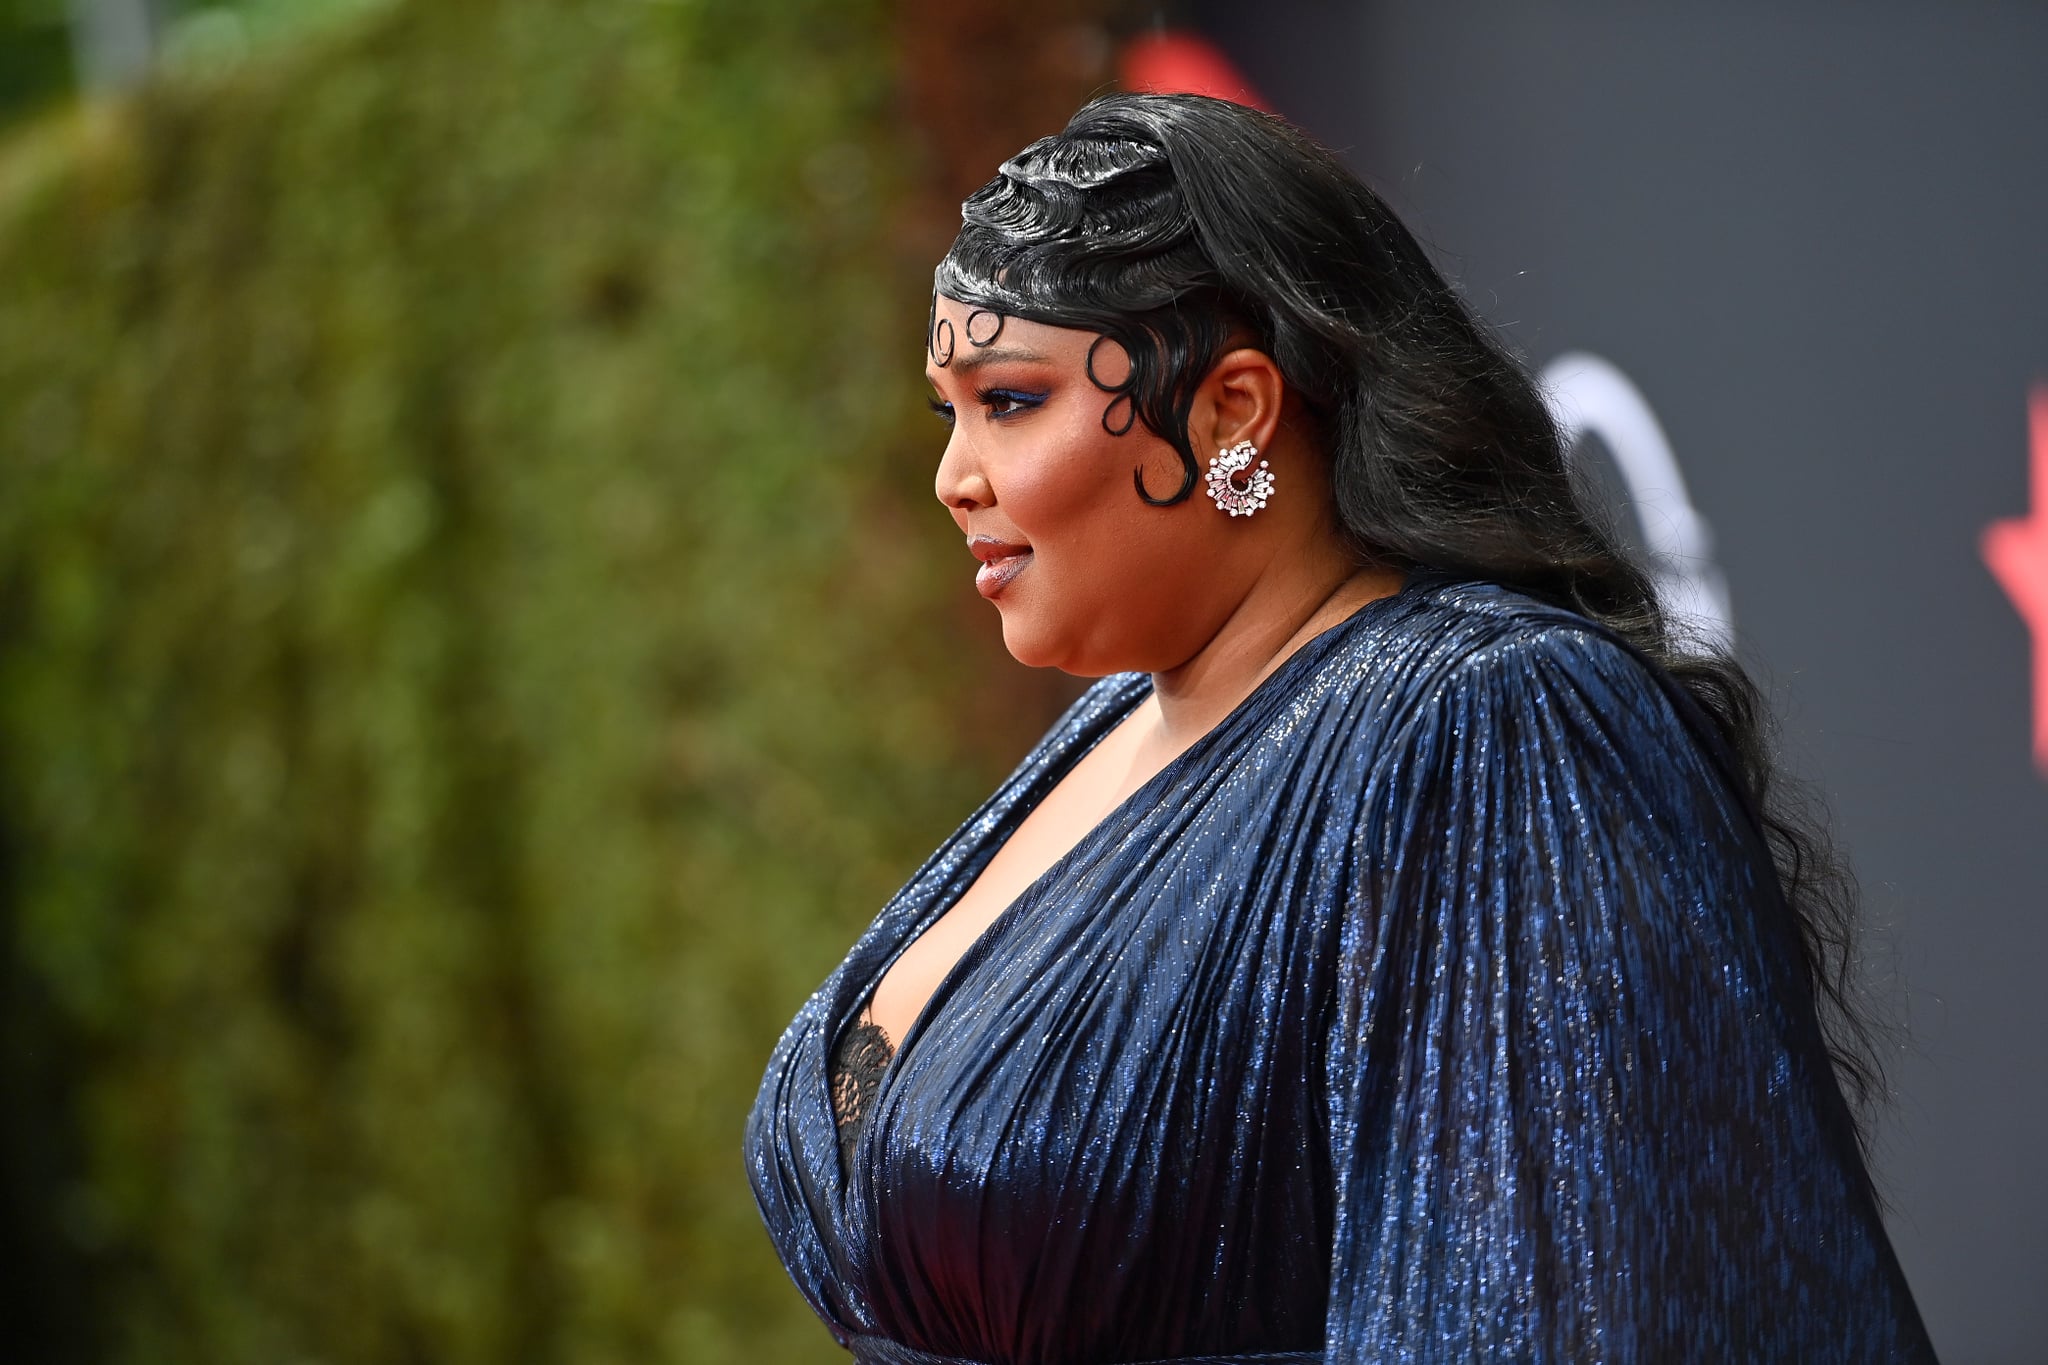 LOS ANGELES, CALIFORNIA - JUNE 26: Lizzo attends the 2022 BET Awards at Microsoft Theatre on June 26, 2022 in Los Angeles, California. (Photo by Paras Griffin/Getty Images for BET)